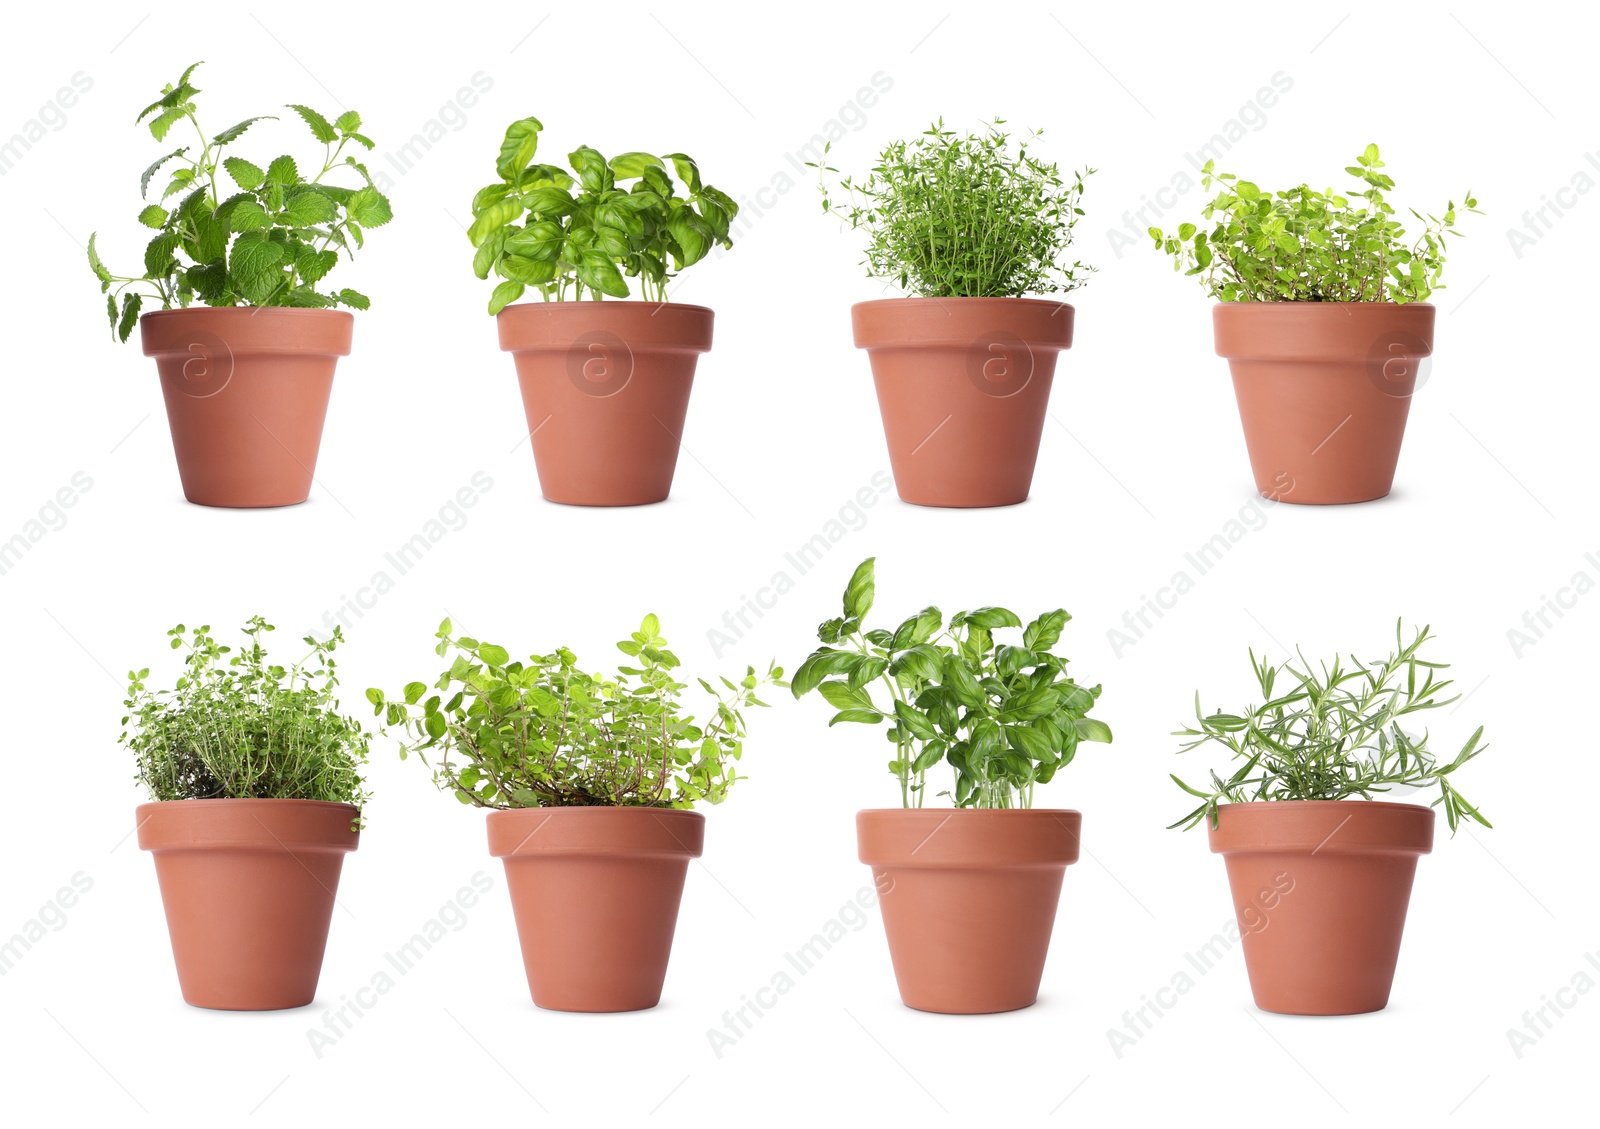 Image of Collage with different herbs growing in clay pots isolated on white. Thyme, oregano, lemon balm, basil and rosemary